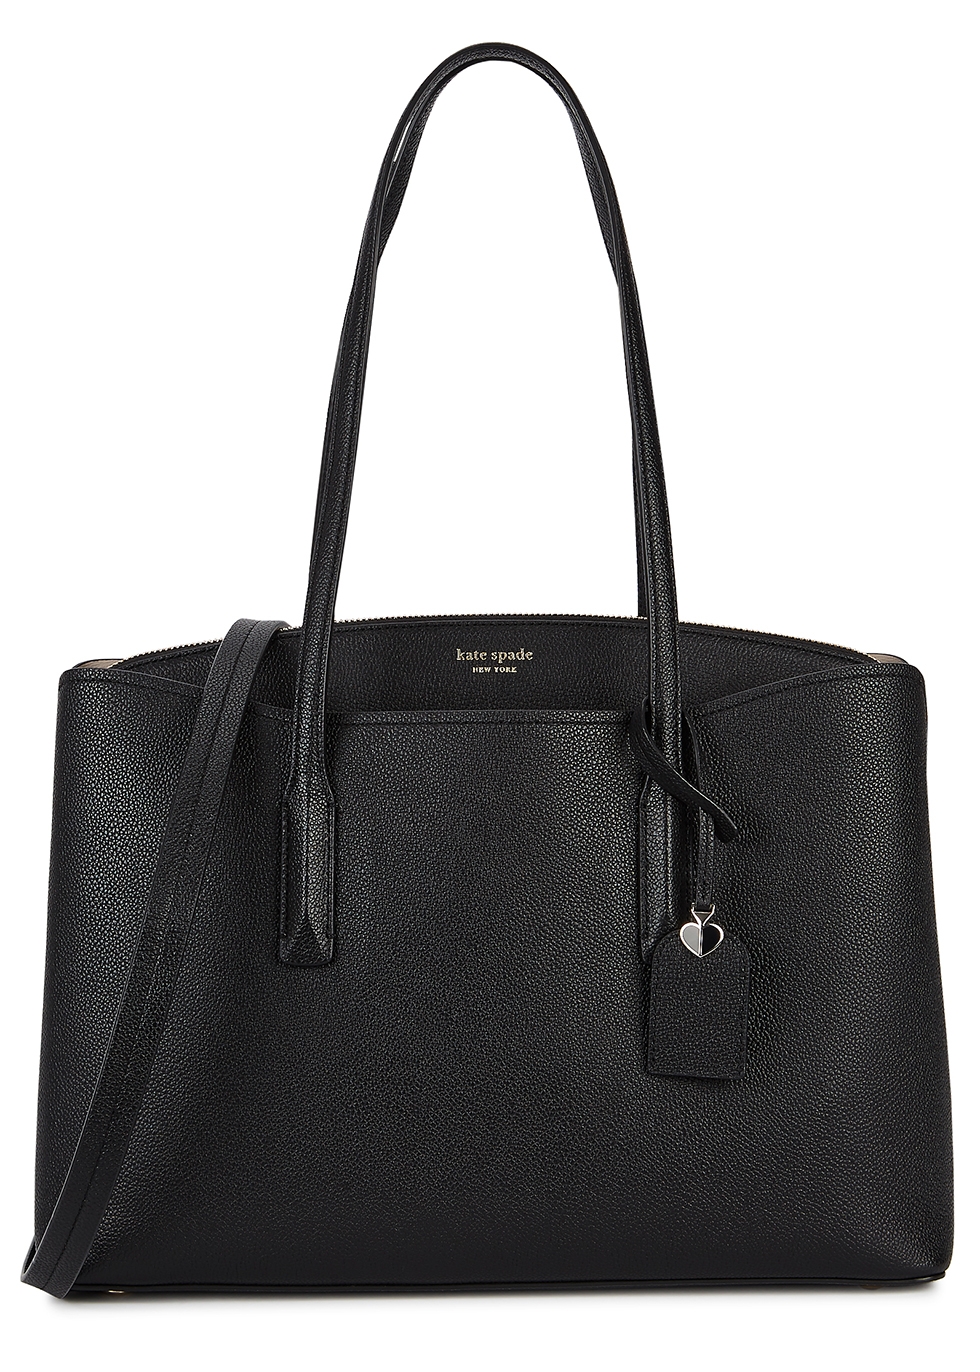 Margaux black leather tote